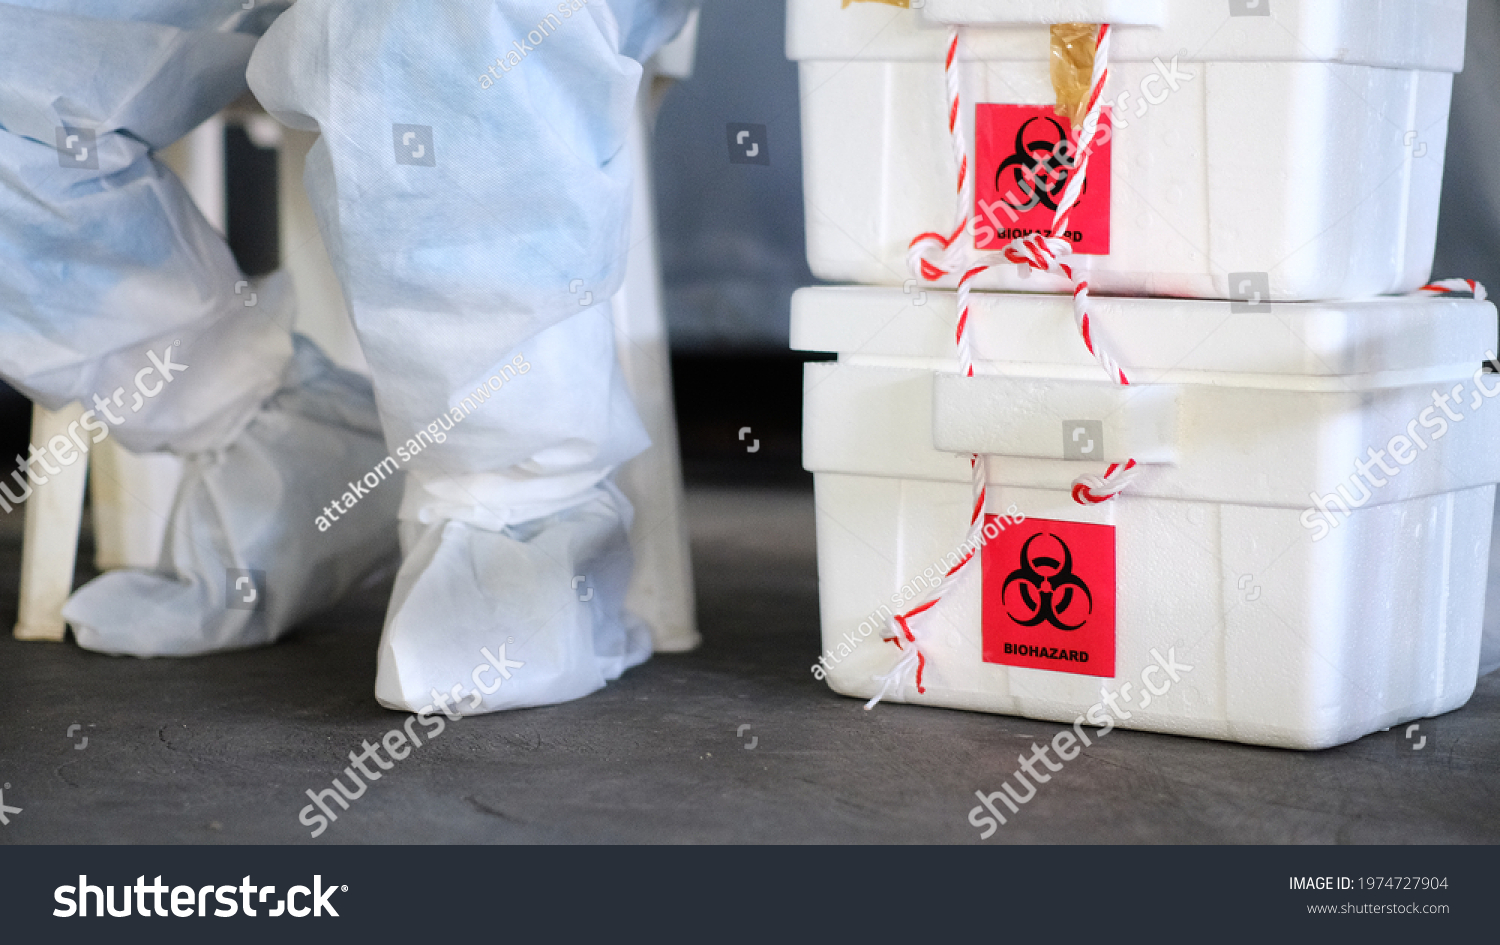 The biohazard box stores a swab test covid-19 and a doctor wearing a PPE protective suit. #1974727904